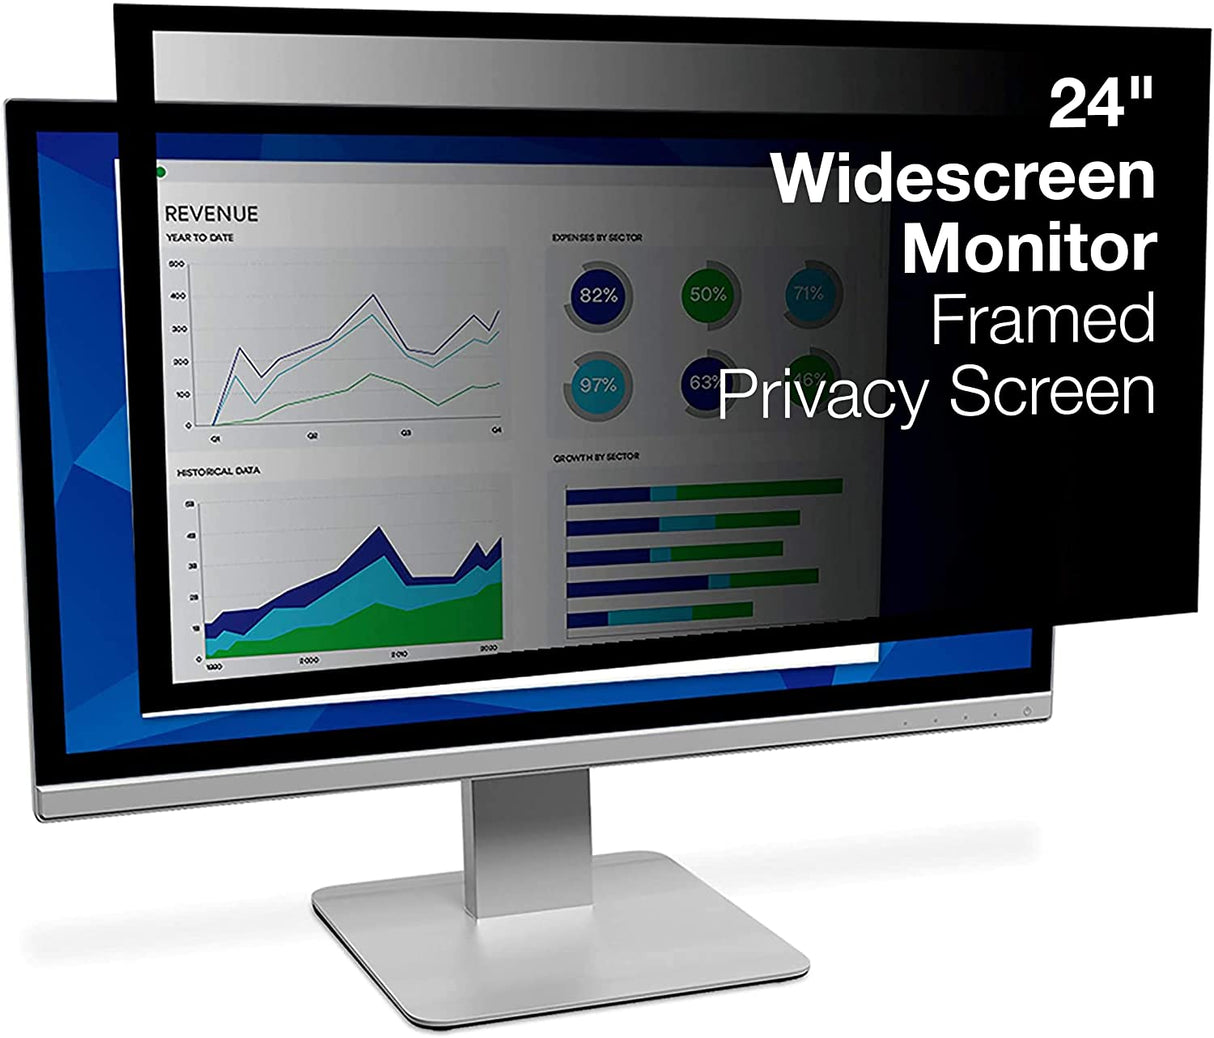 3M Framed Privacy Filter for 24" Diagonal Widescreen Monitor, Protects your confidential information, Black out side views (16:10) (PF240W1F) Black 24" Widescreen Monitor 16:10 - Dealtargets.com